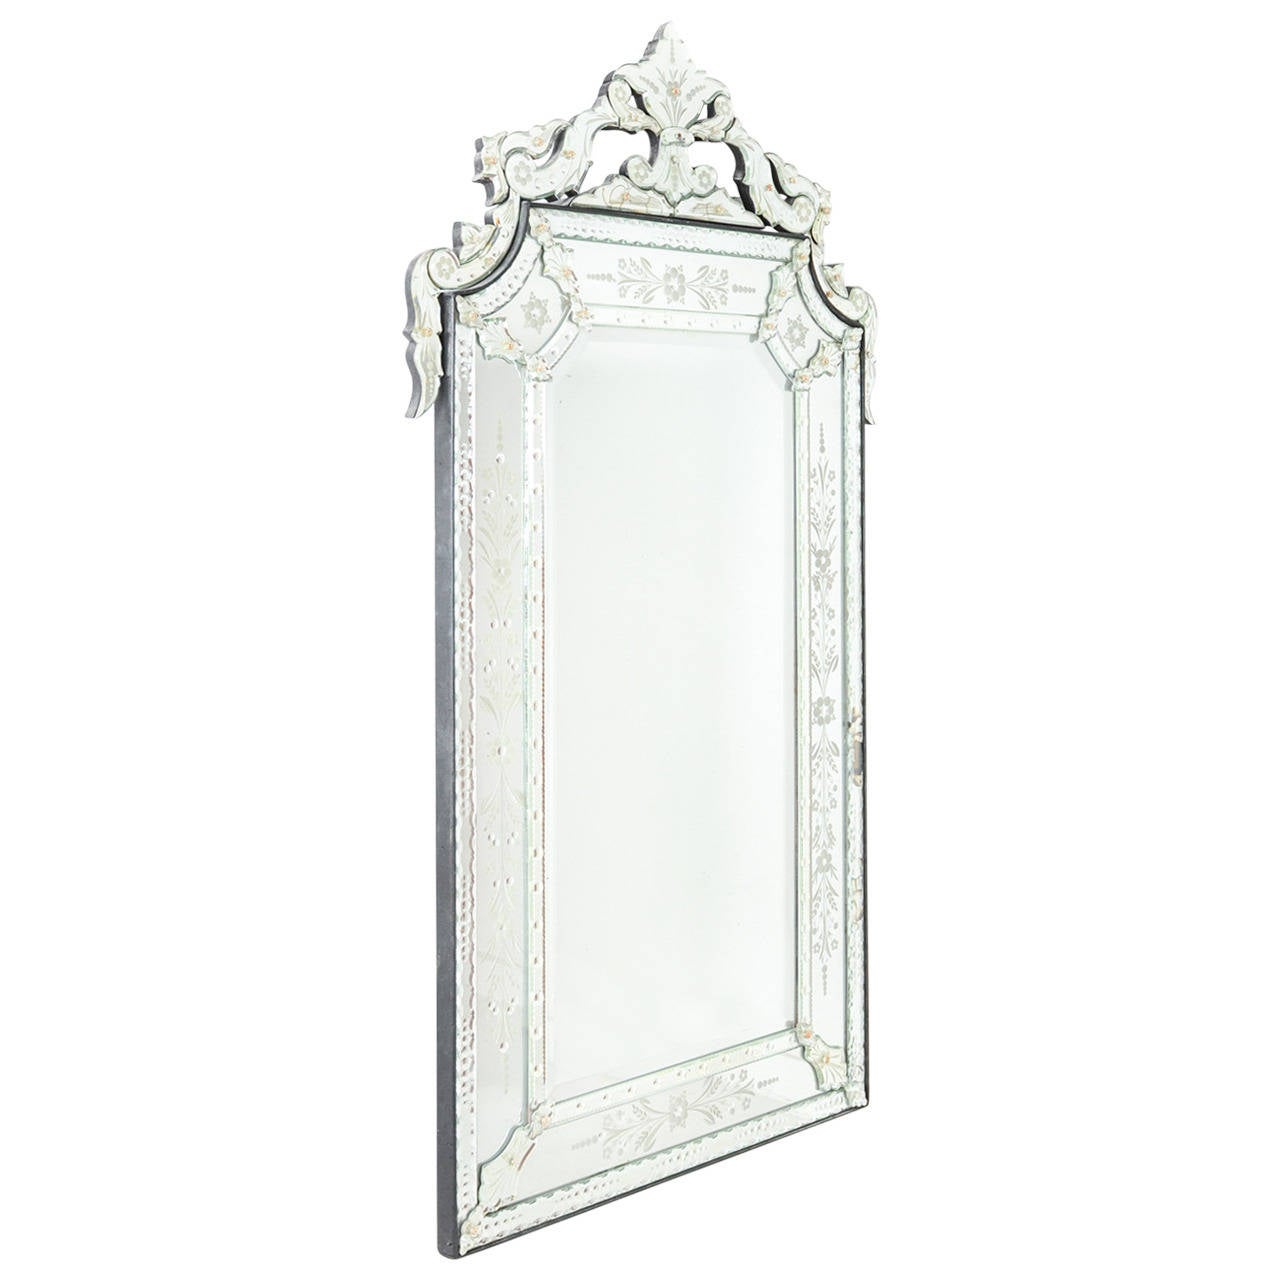 A beautiful early 20th century Venetian mirror. Some wear and minor imperfections (cracks) consistent with age.